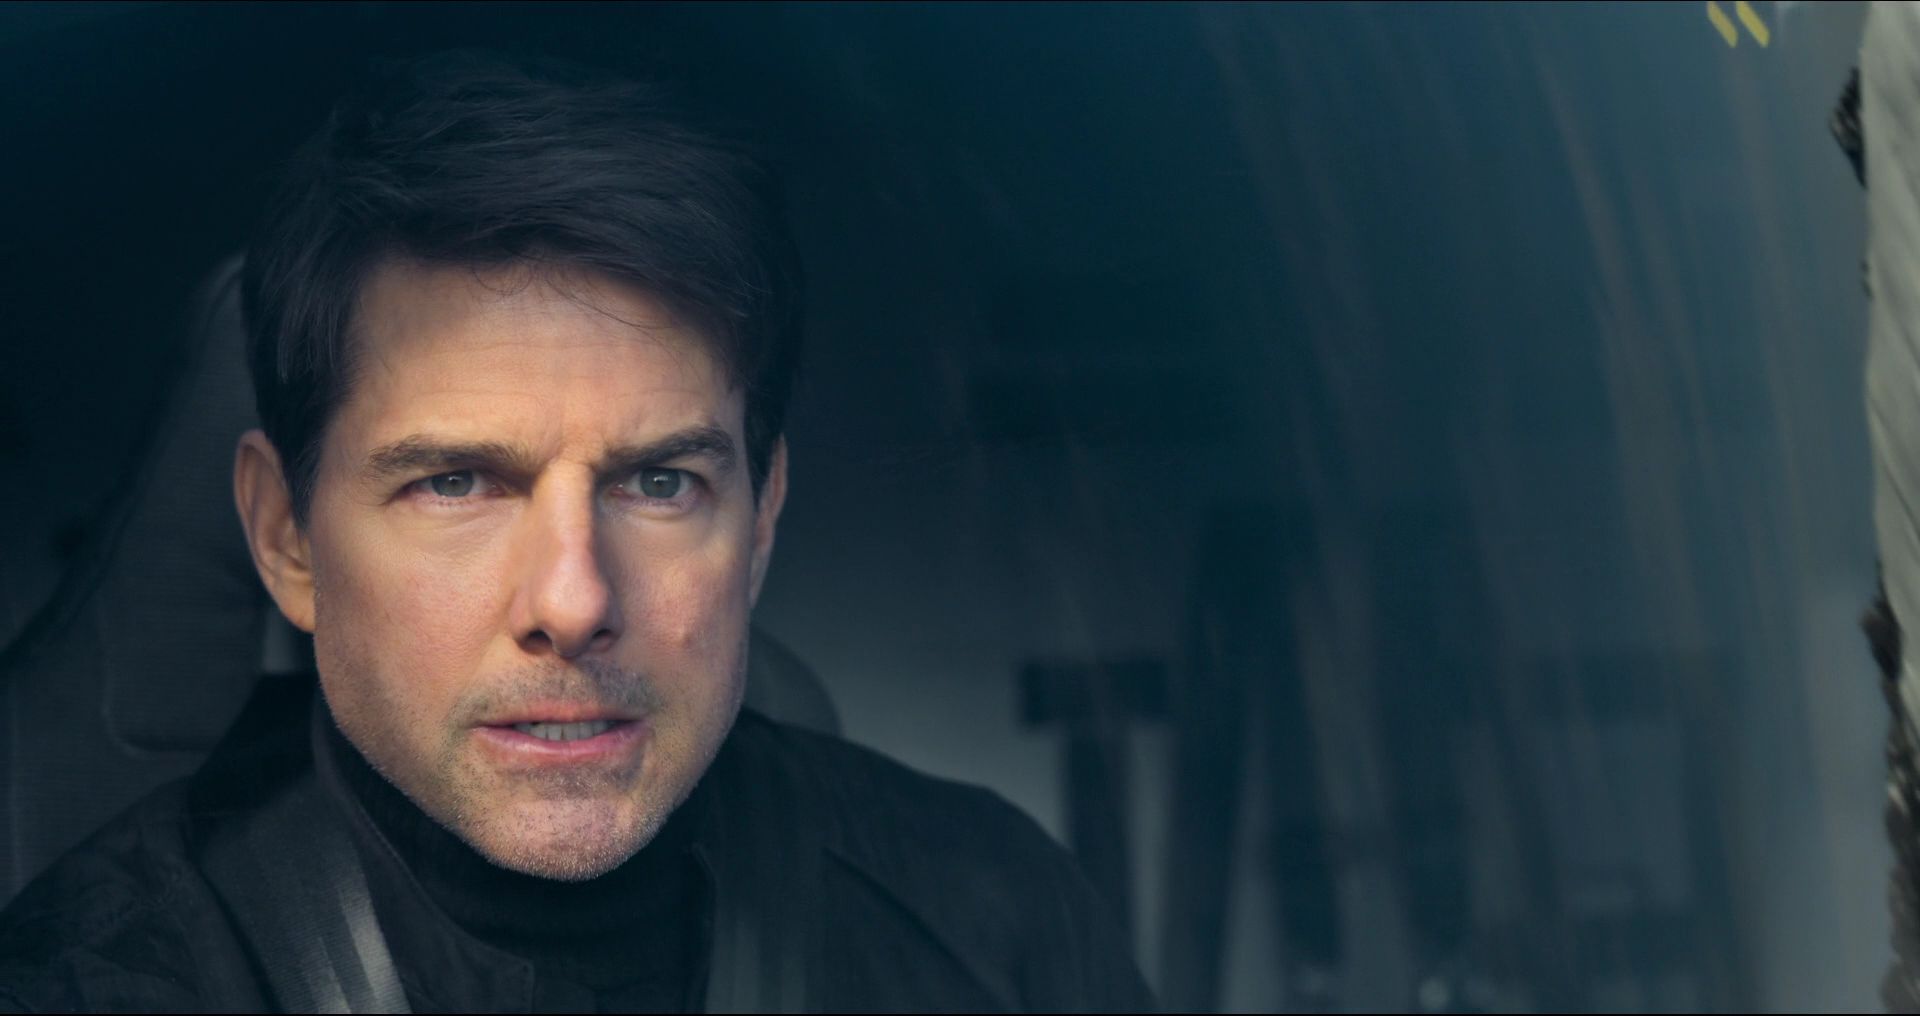 Mission-Impossible-Fallout-3512.jpg